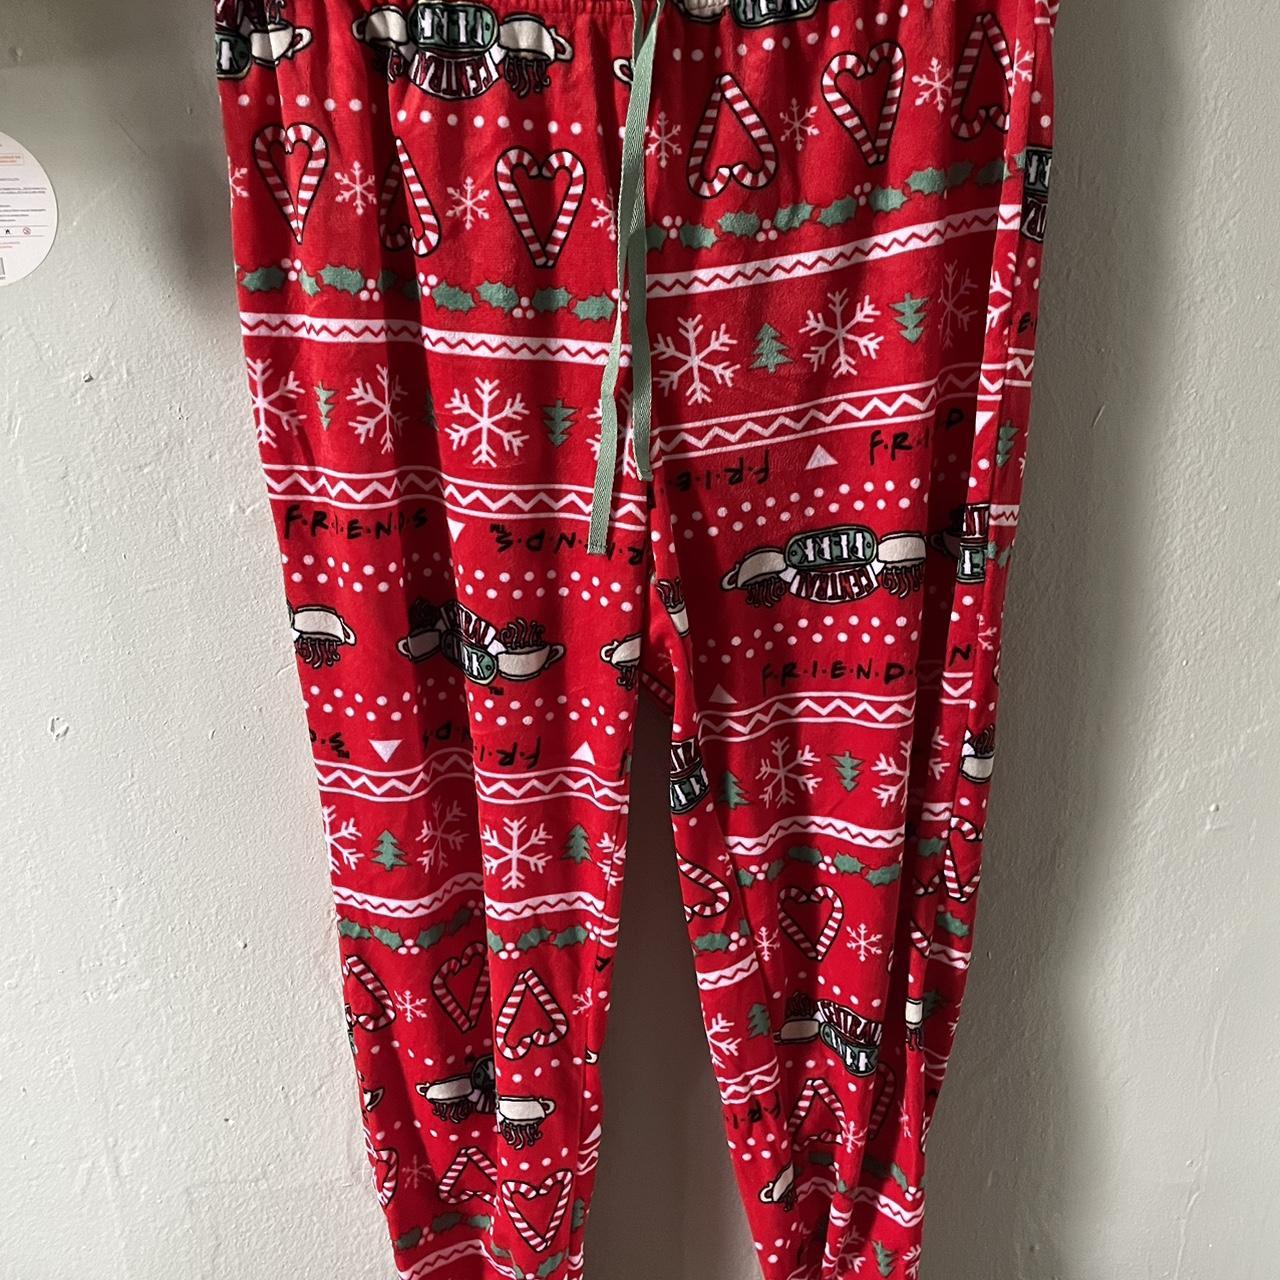 Friends Pajamas Pants. Soft and comfortable. Only... - Depop